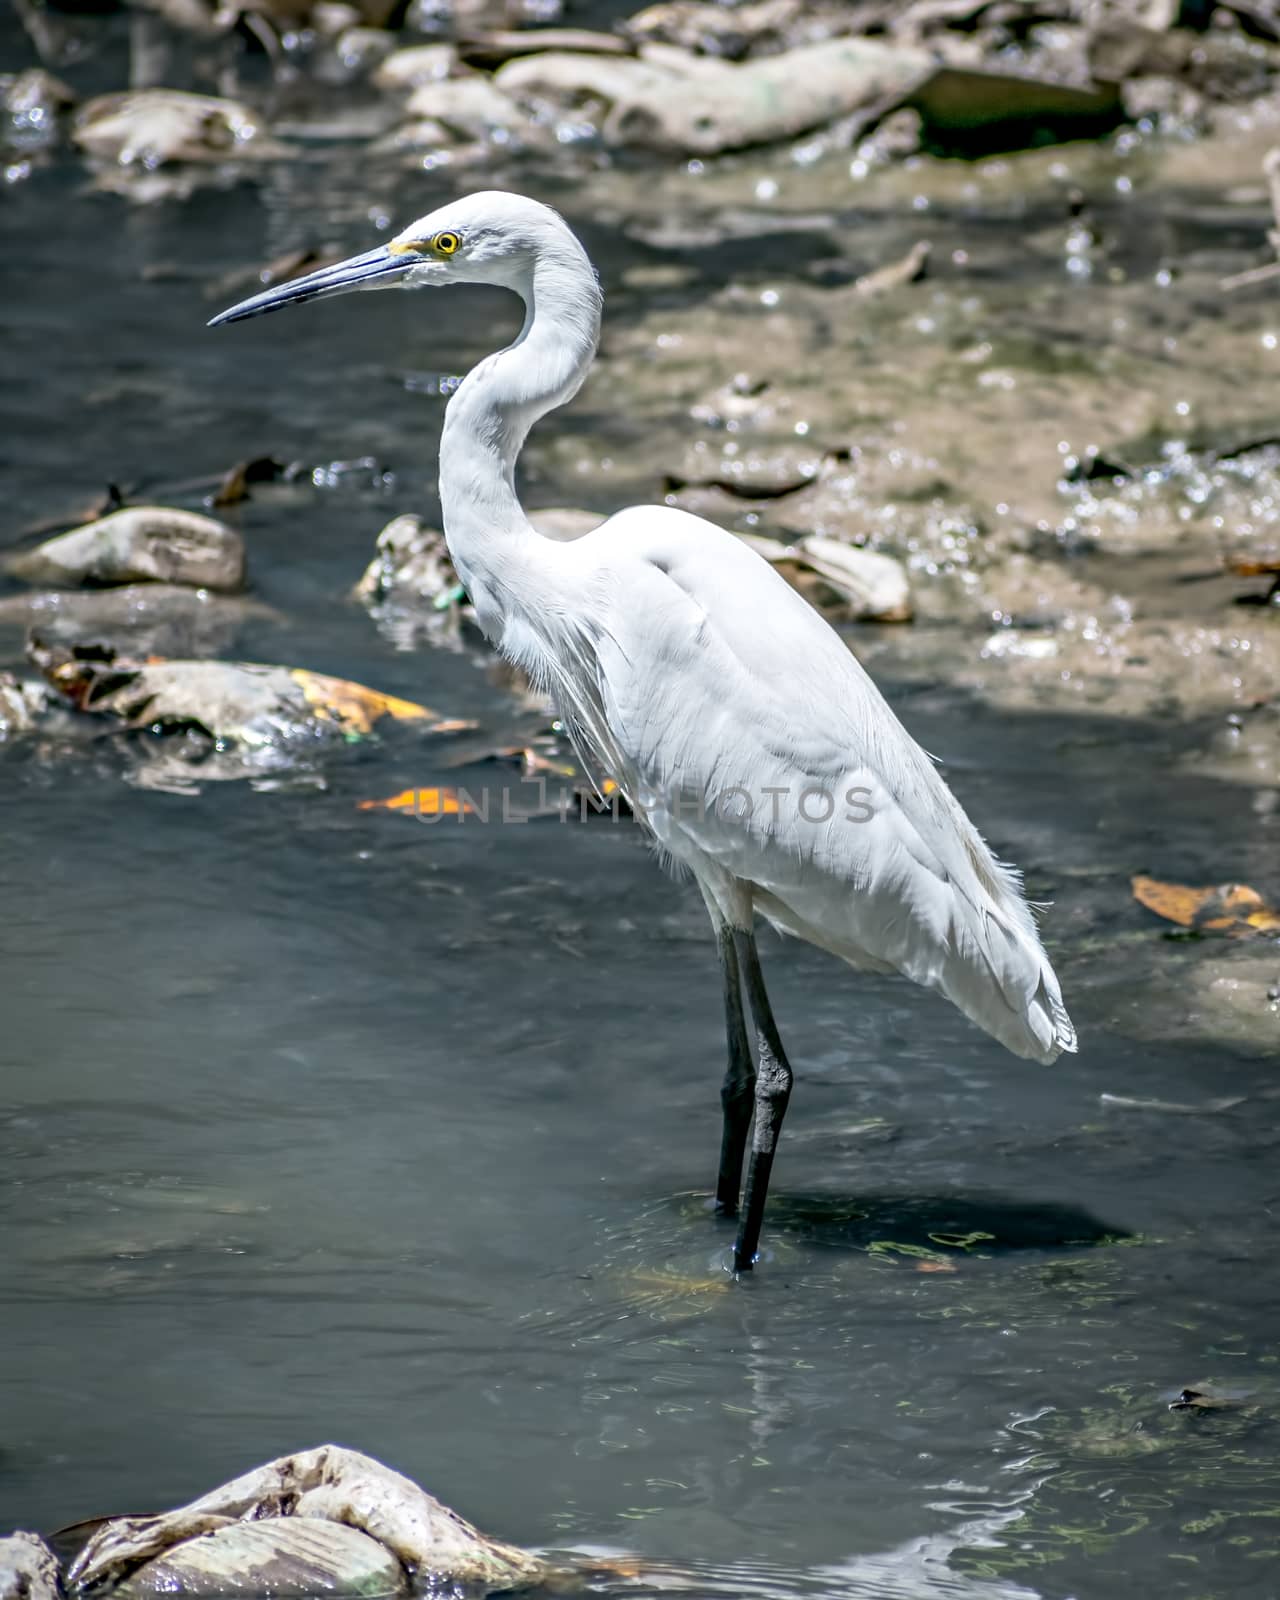 Isolated image of Little Egret bird(Egretta garzetta) in water. Little egret is a species of small heron in the family Ardeidae. The genus name comes from the Provençal French Aigrette, "egret".